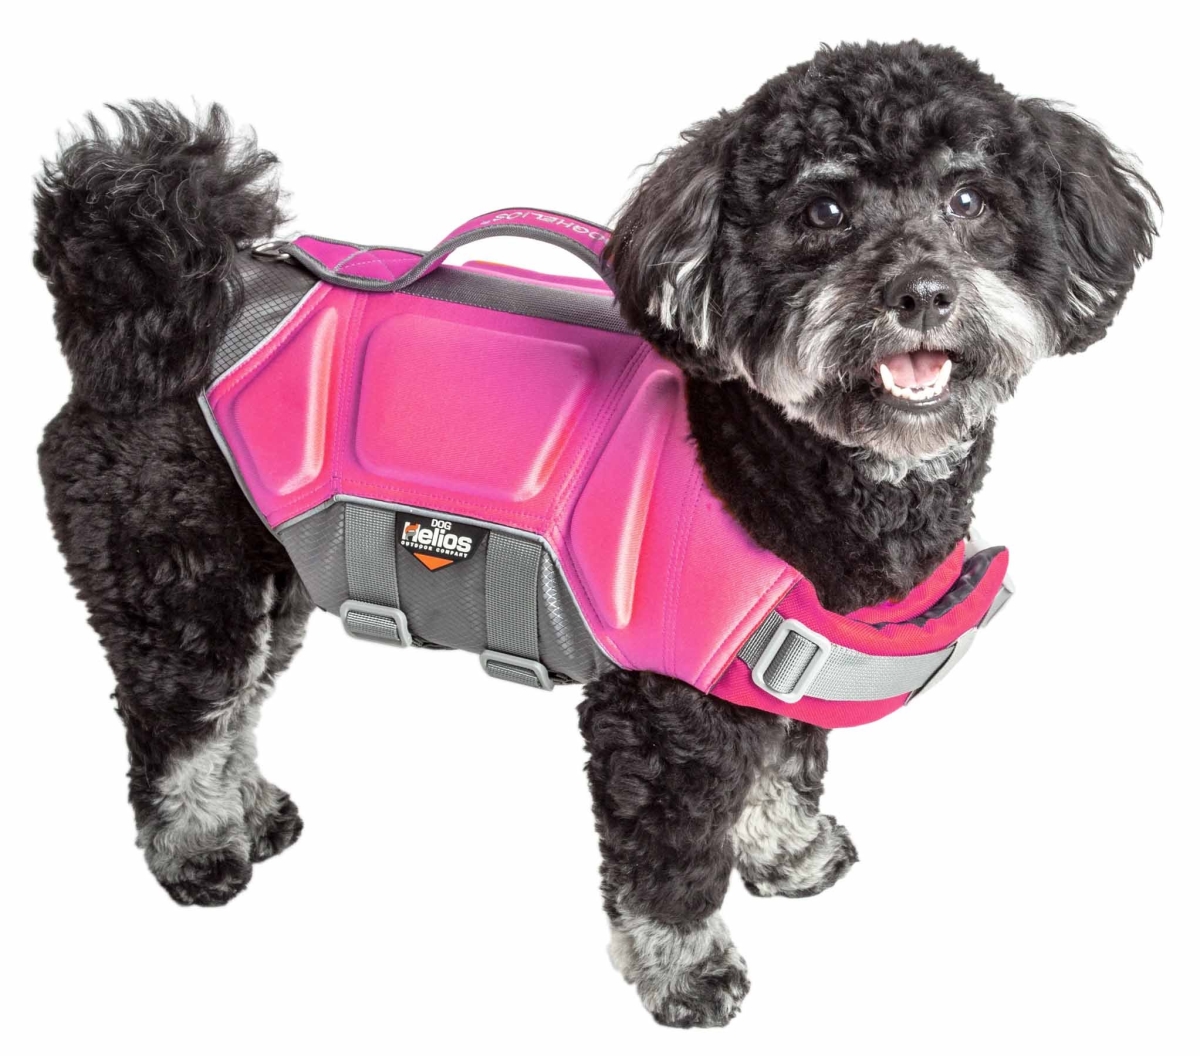 Picture of Dog Helios HA18PKXL Tidal Guard Multi-Point Strategically-Stitched Reflective Pet Dog Life Jacket Vest - Pink, Extra Large